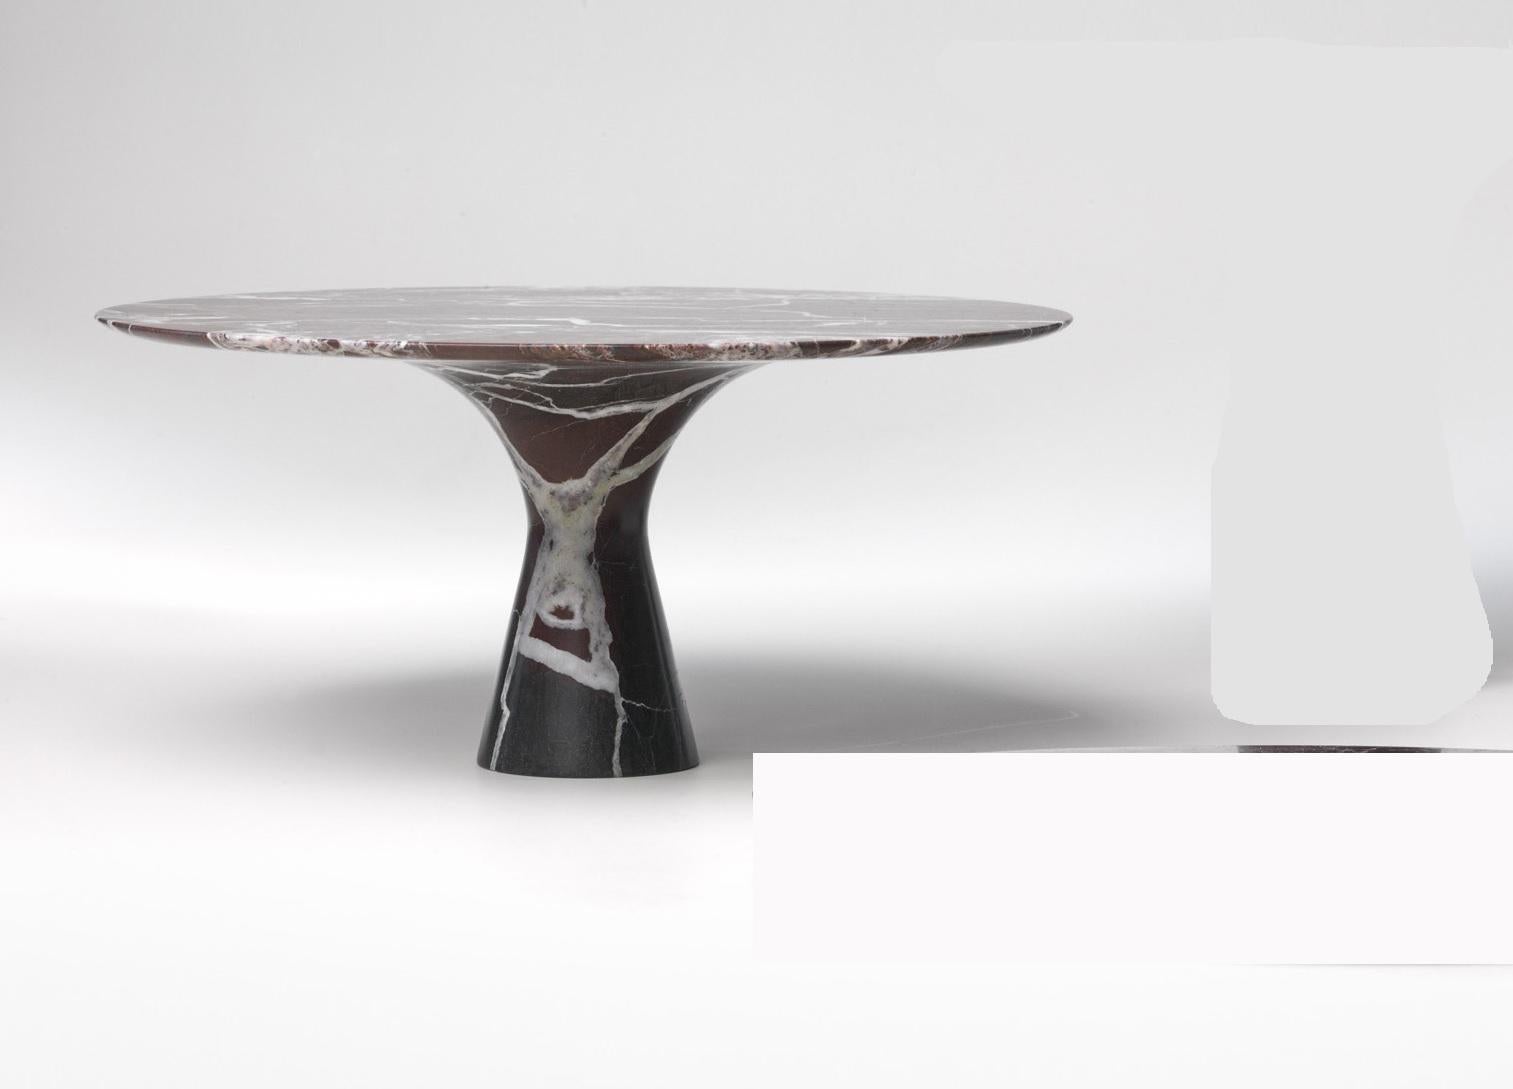 Refined Contemporary Marble 02 Rosso Levanto marble cake stand
Signed by Leo Aerts.
Dimensions: Diameter 32 x Height 15 cm 
Material: Rosso Levanto Marble
Technique: Polished, Carved. 
Available in Marble: Kyknos, Bianco Statuarietto, Grey